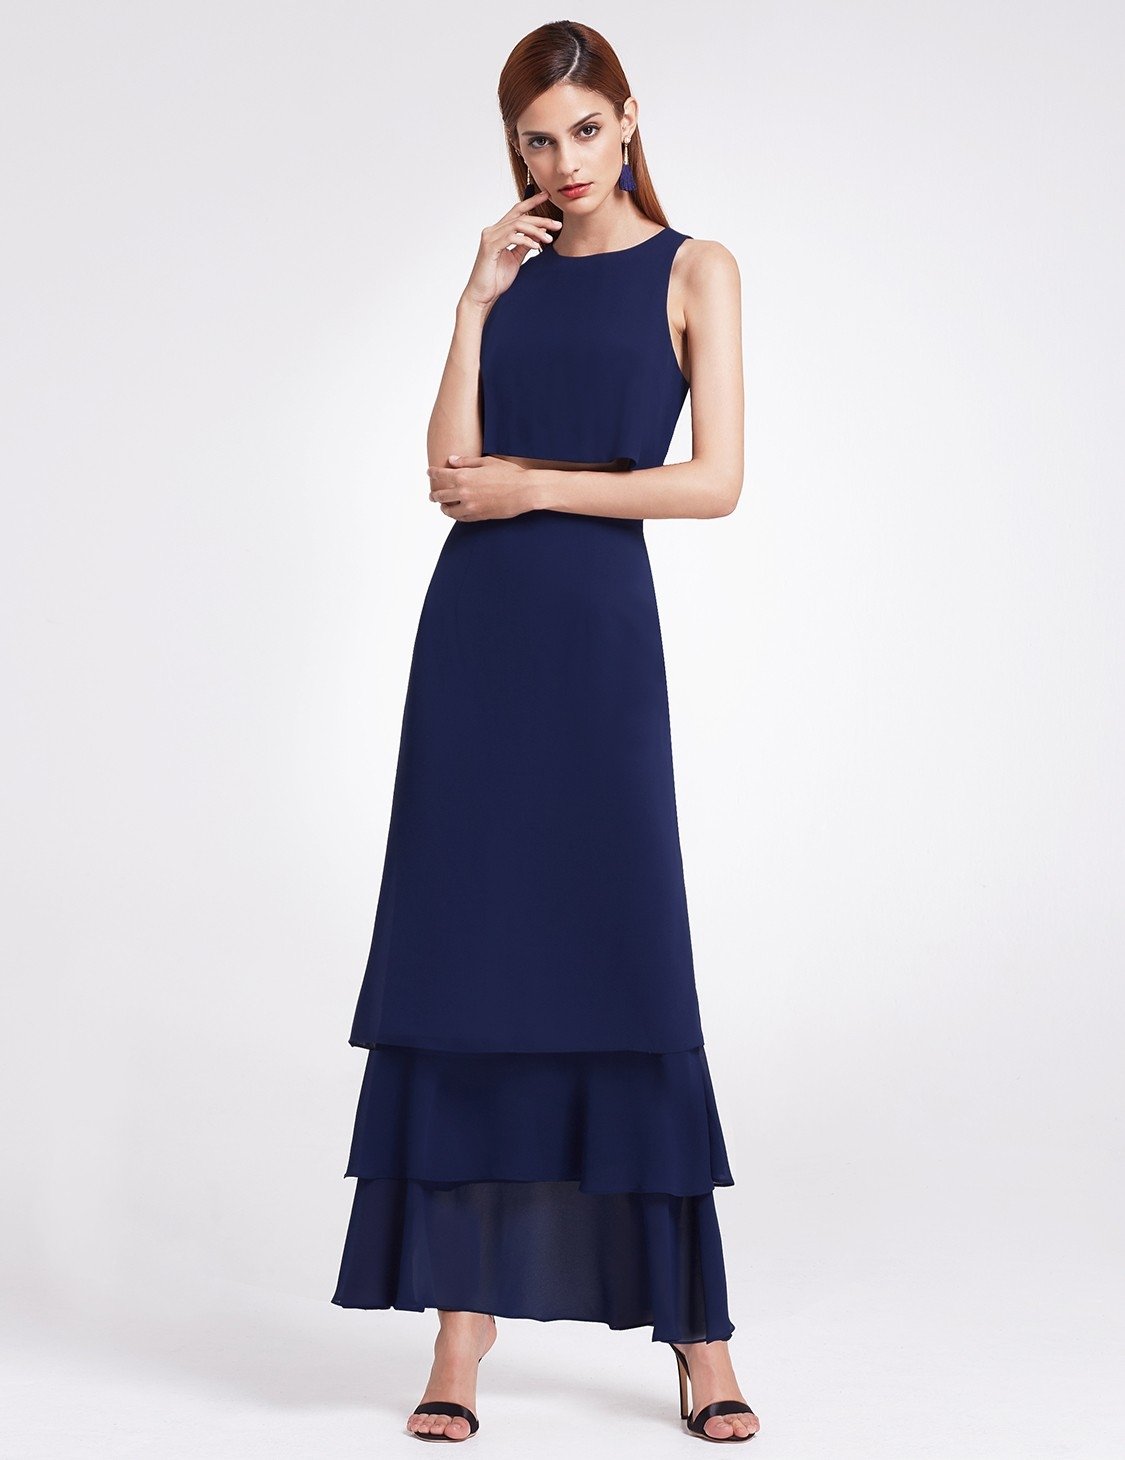 Navy Blue Bridesmaid Dress Style Guide ...